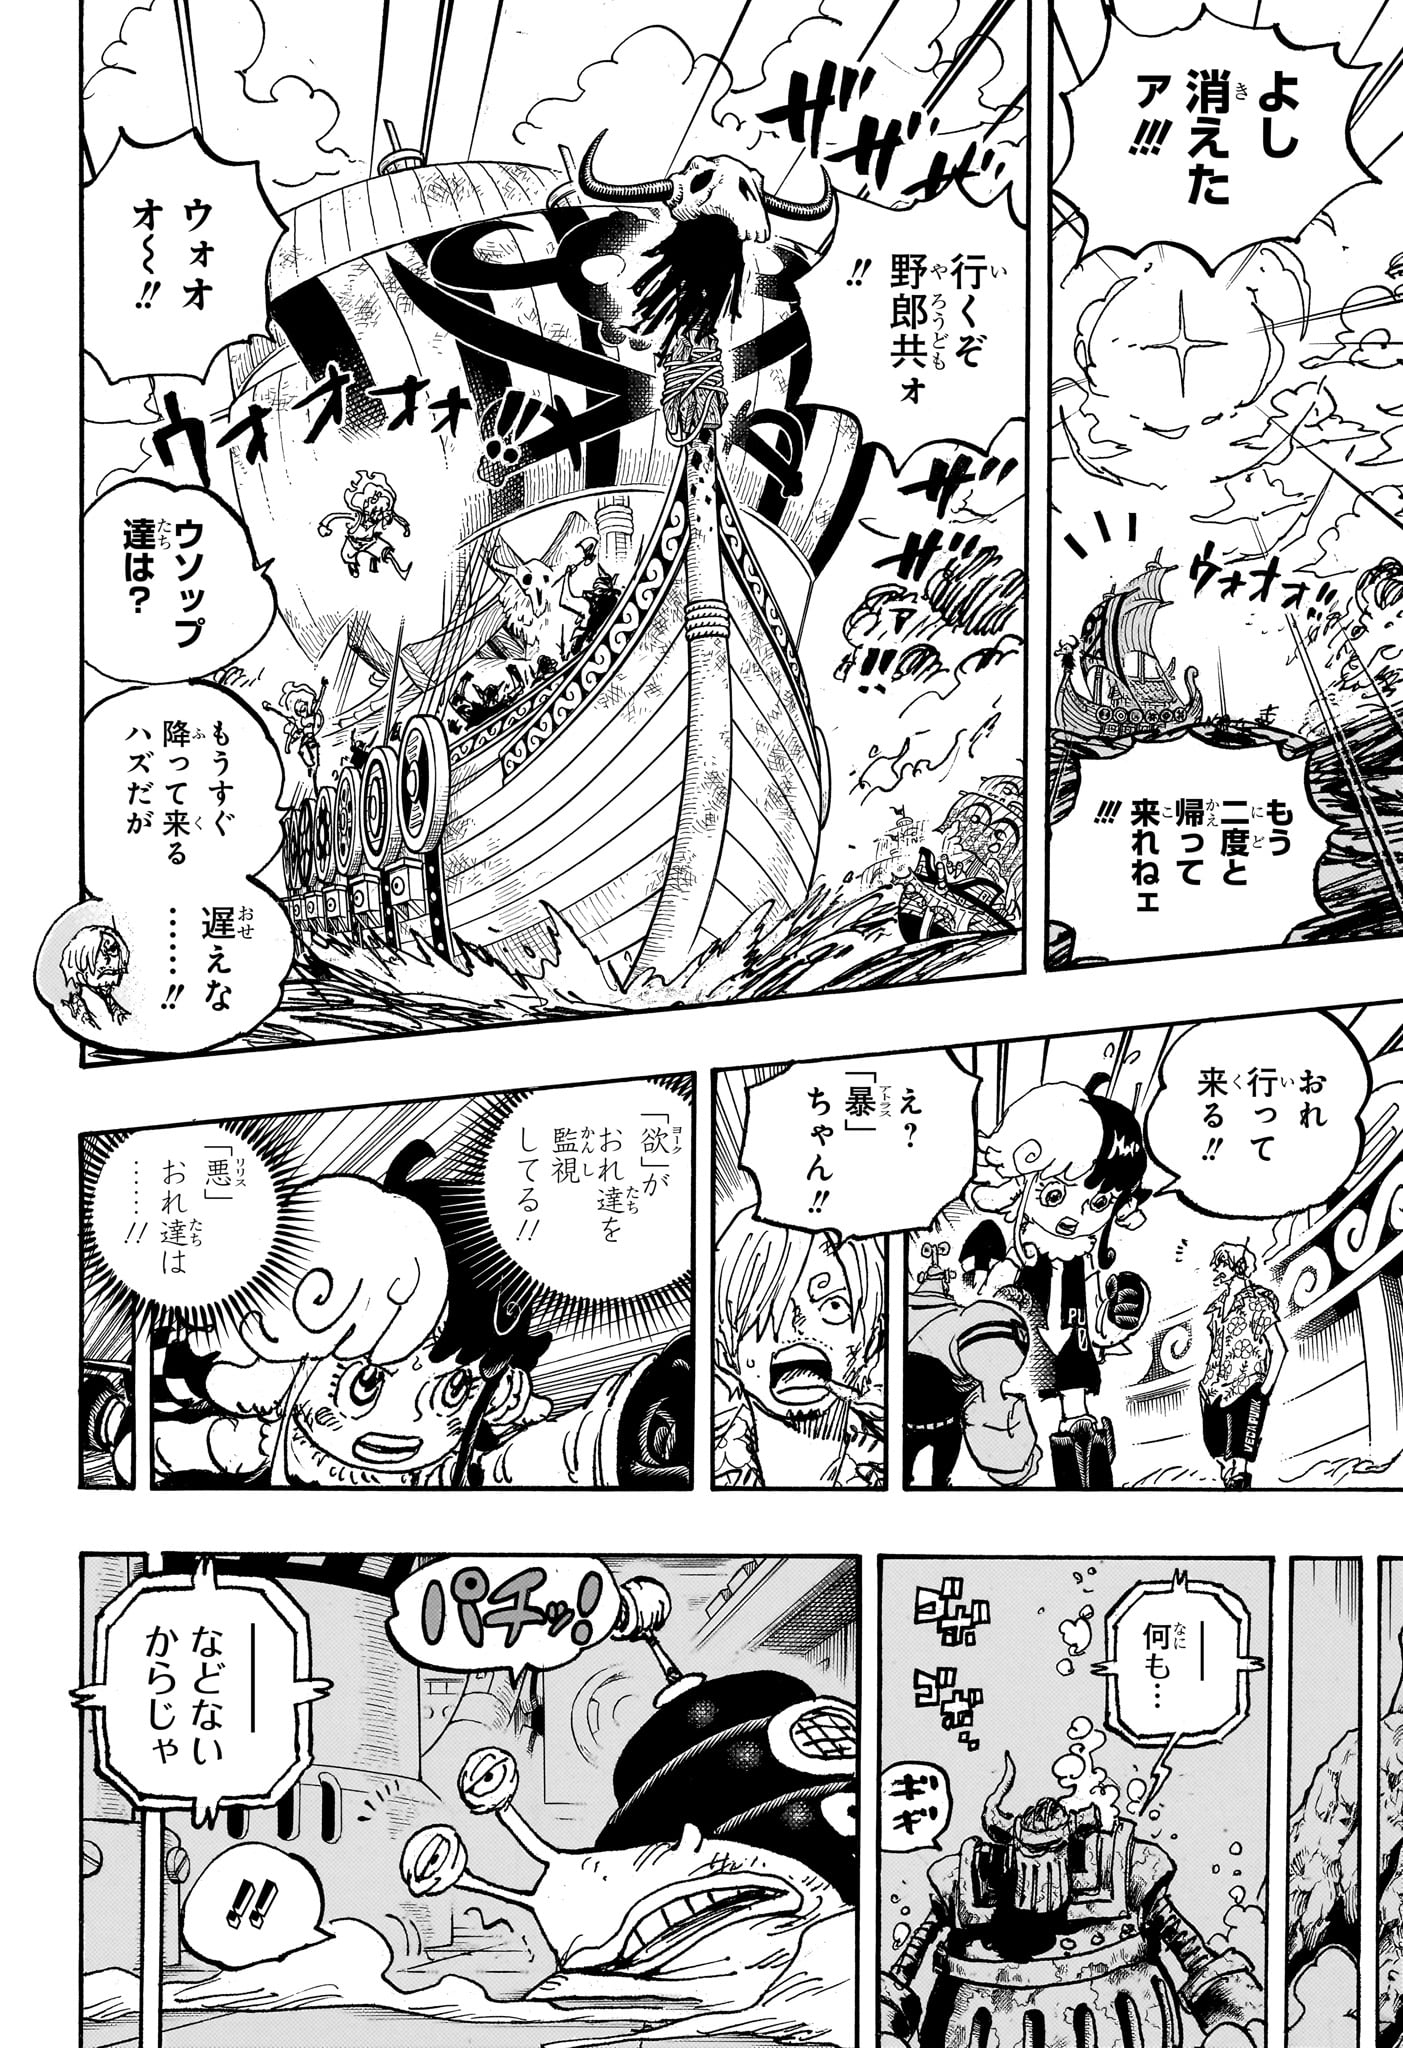 One Piece - Chapter 1119 - Page 8